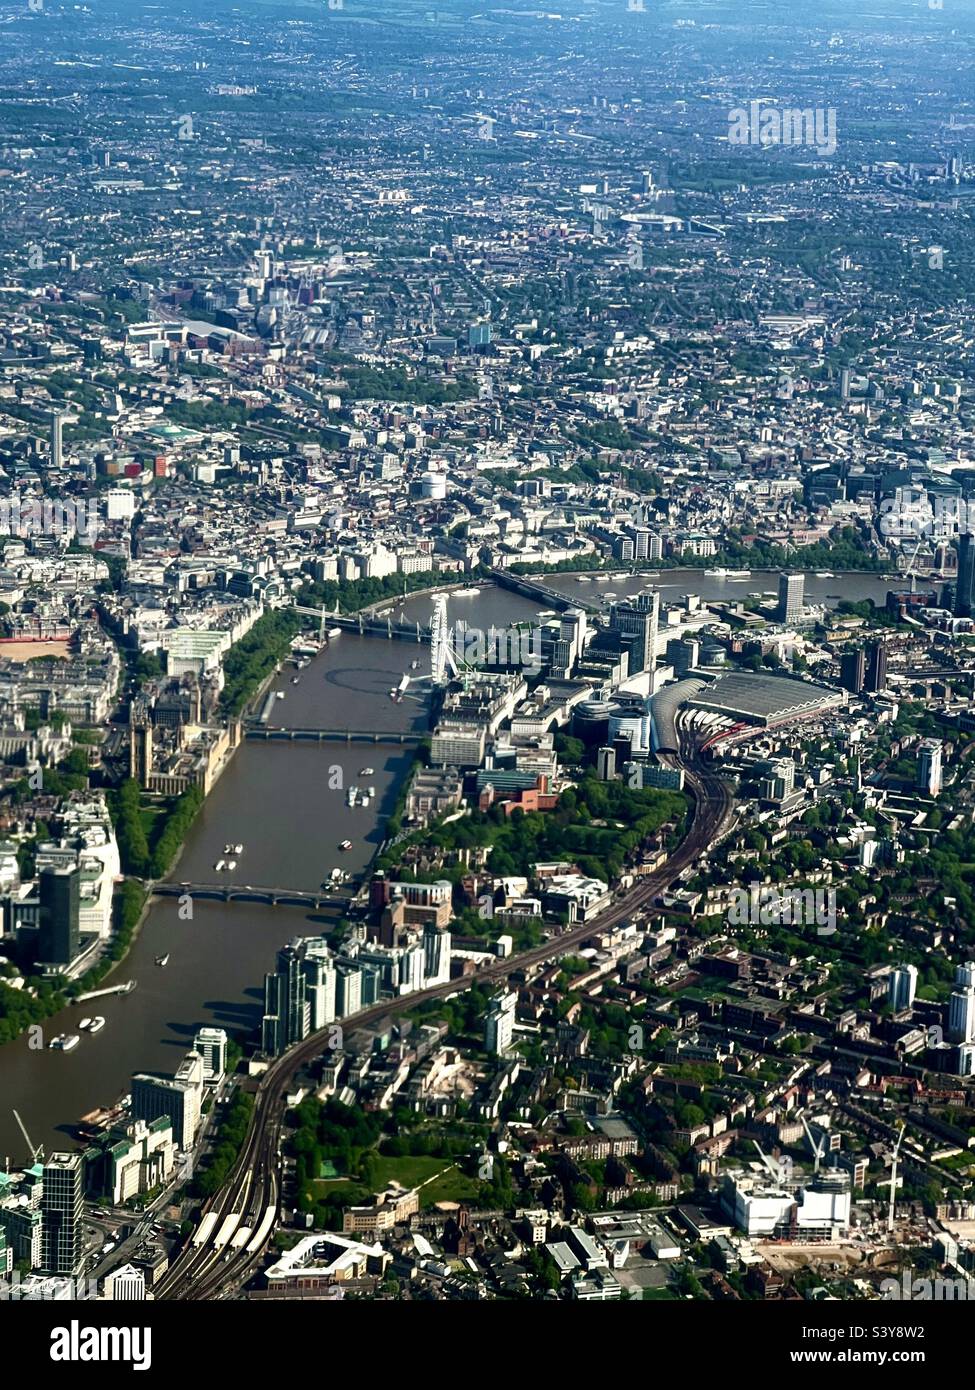 Aerial view of London with Waterloo train station and the millennium wheel Stock Photo